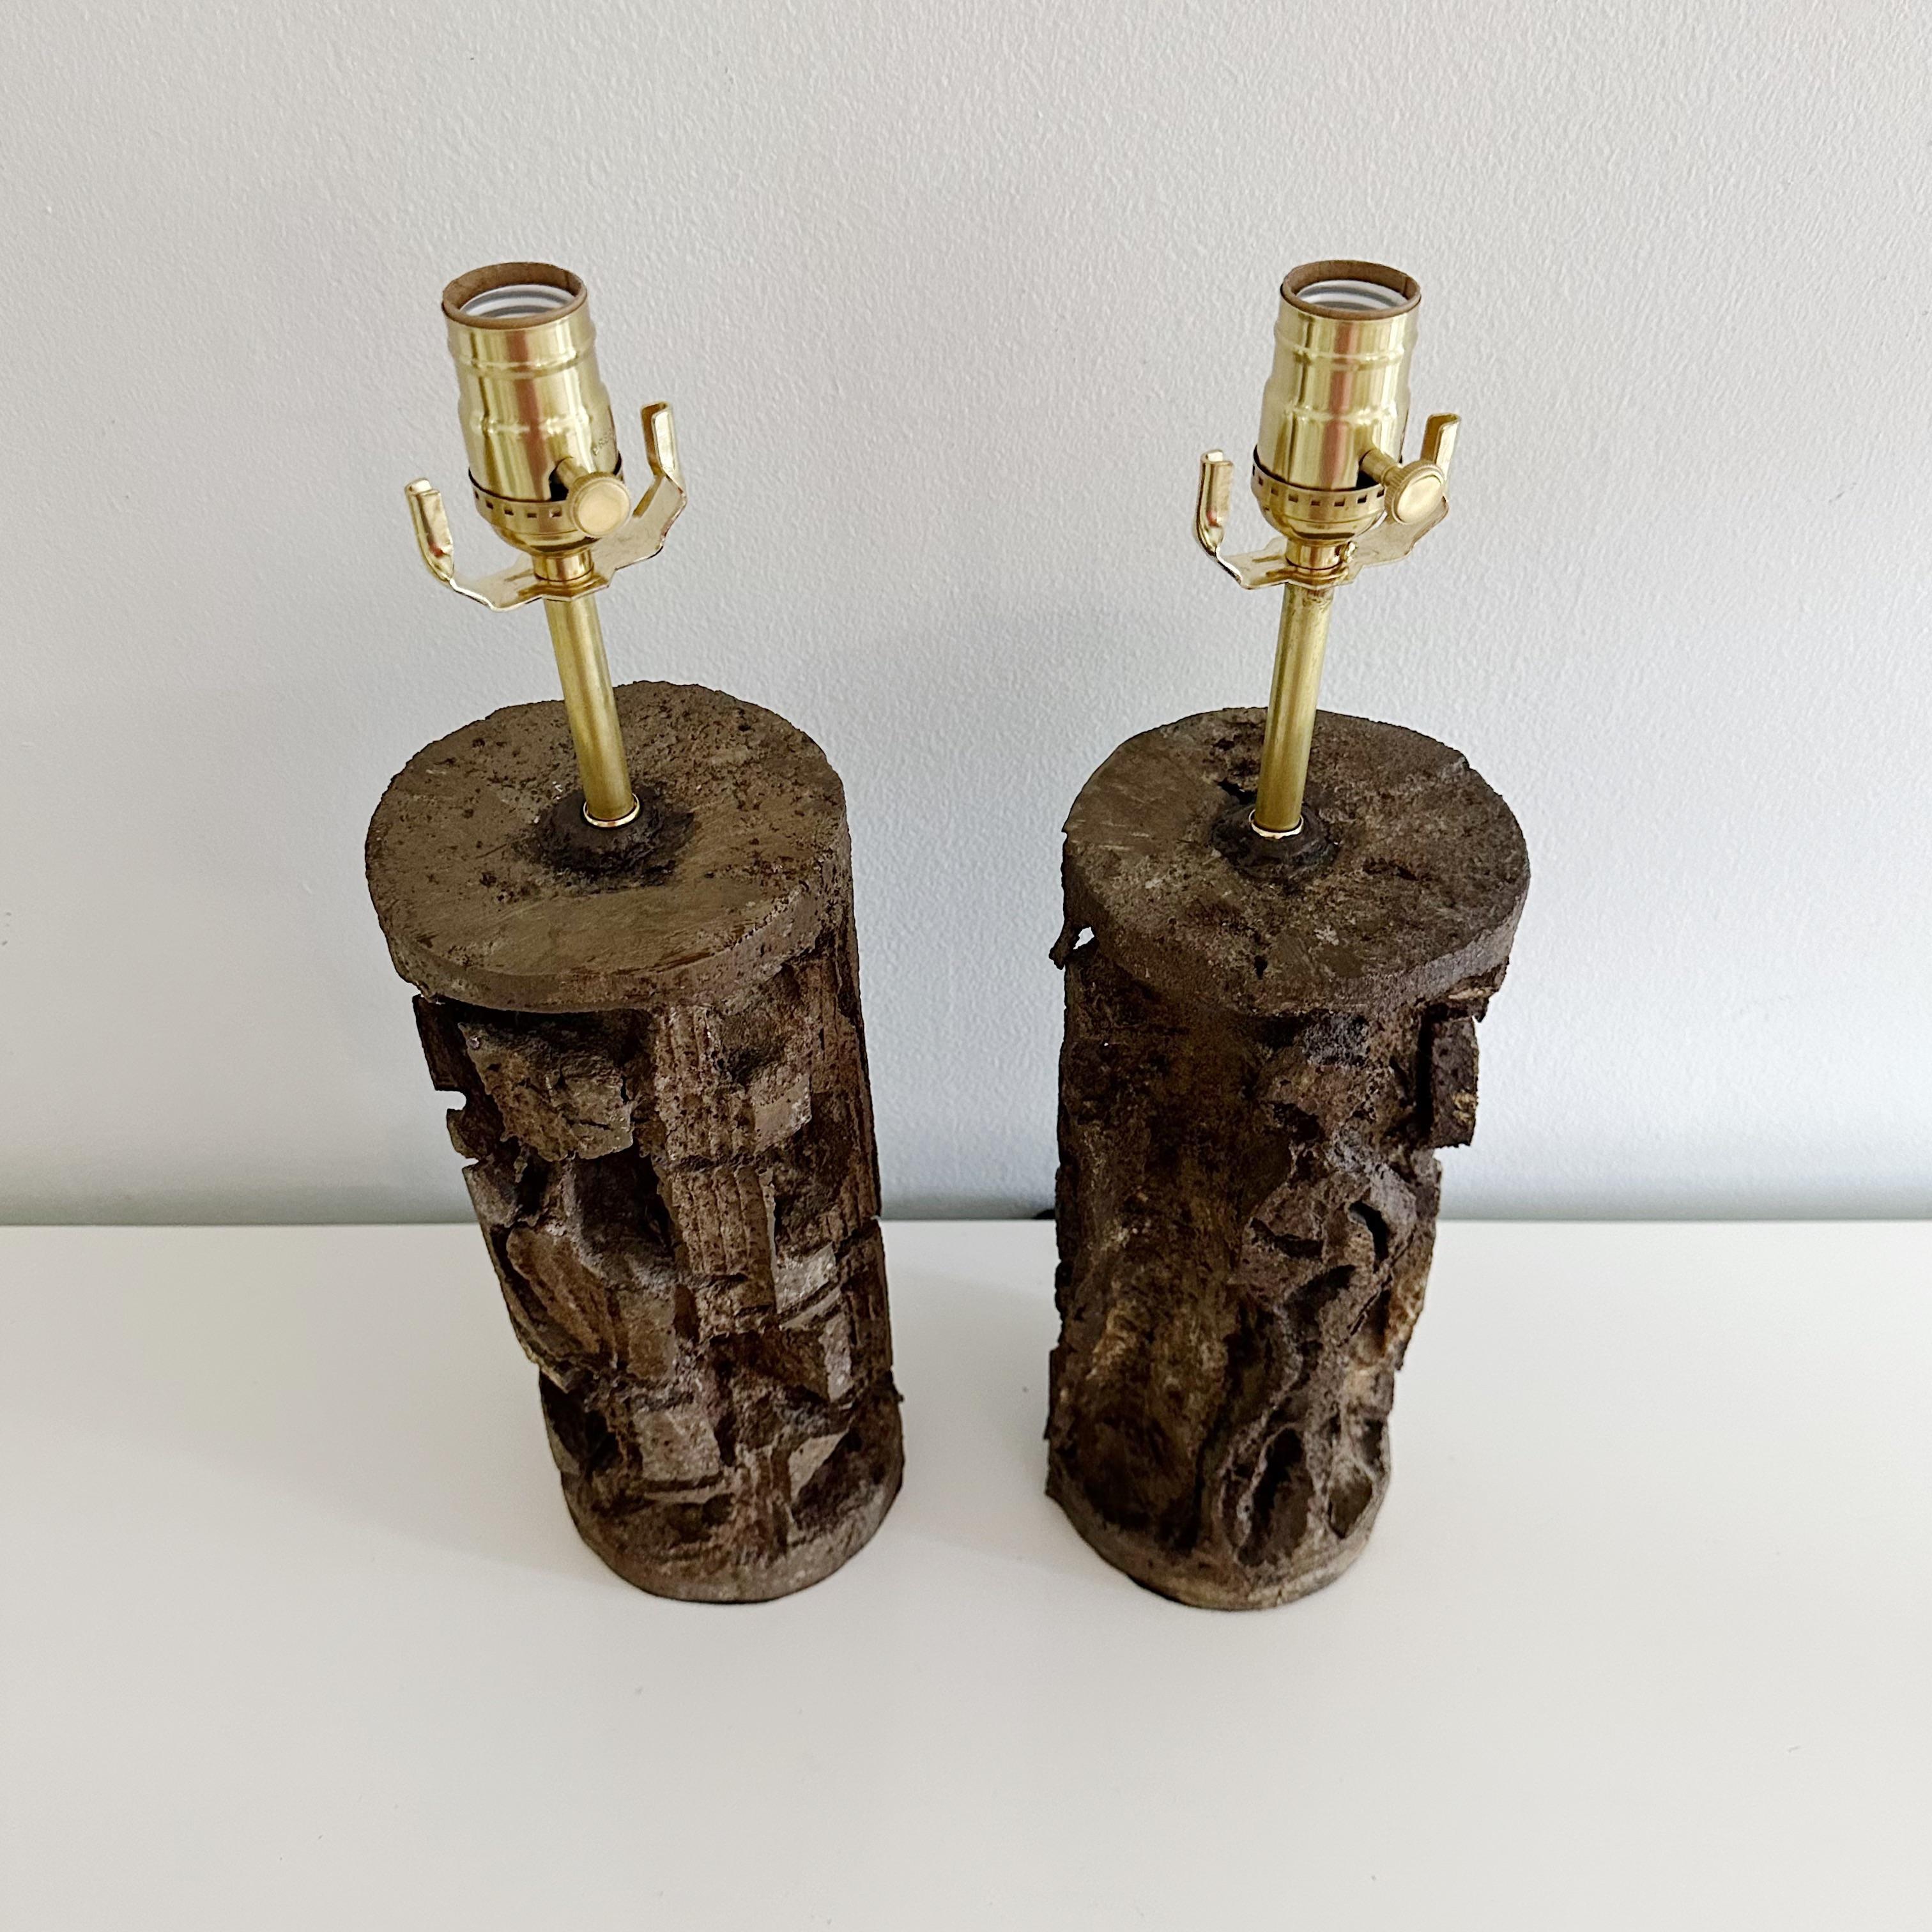 Pair Brutalist Mid Century Lamps Signed
Captivating pair of handmade brutalist lamps. Crafted from sturdy aluminum with a rich bronze-colored finish, each lamp possesses its own unique dimensions due to their handmade nature; one stands a quarter